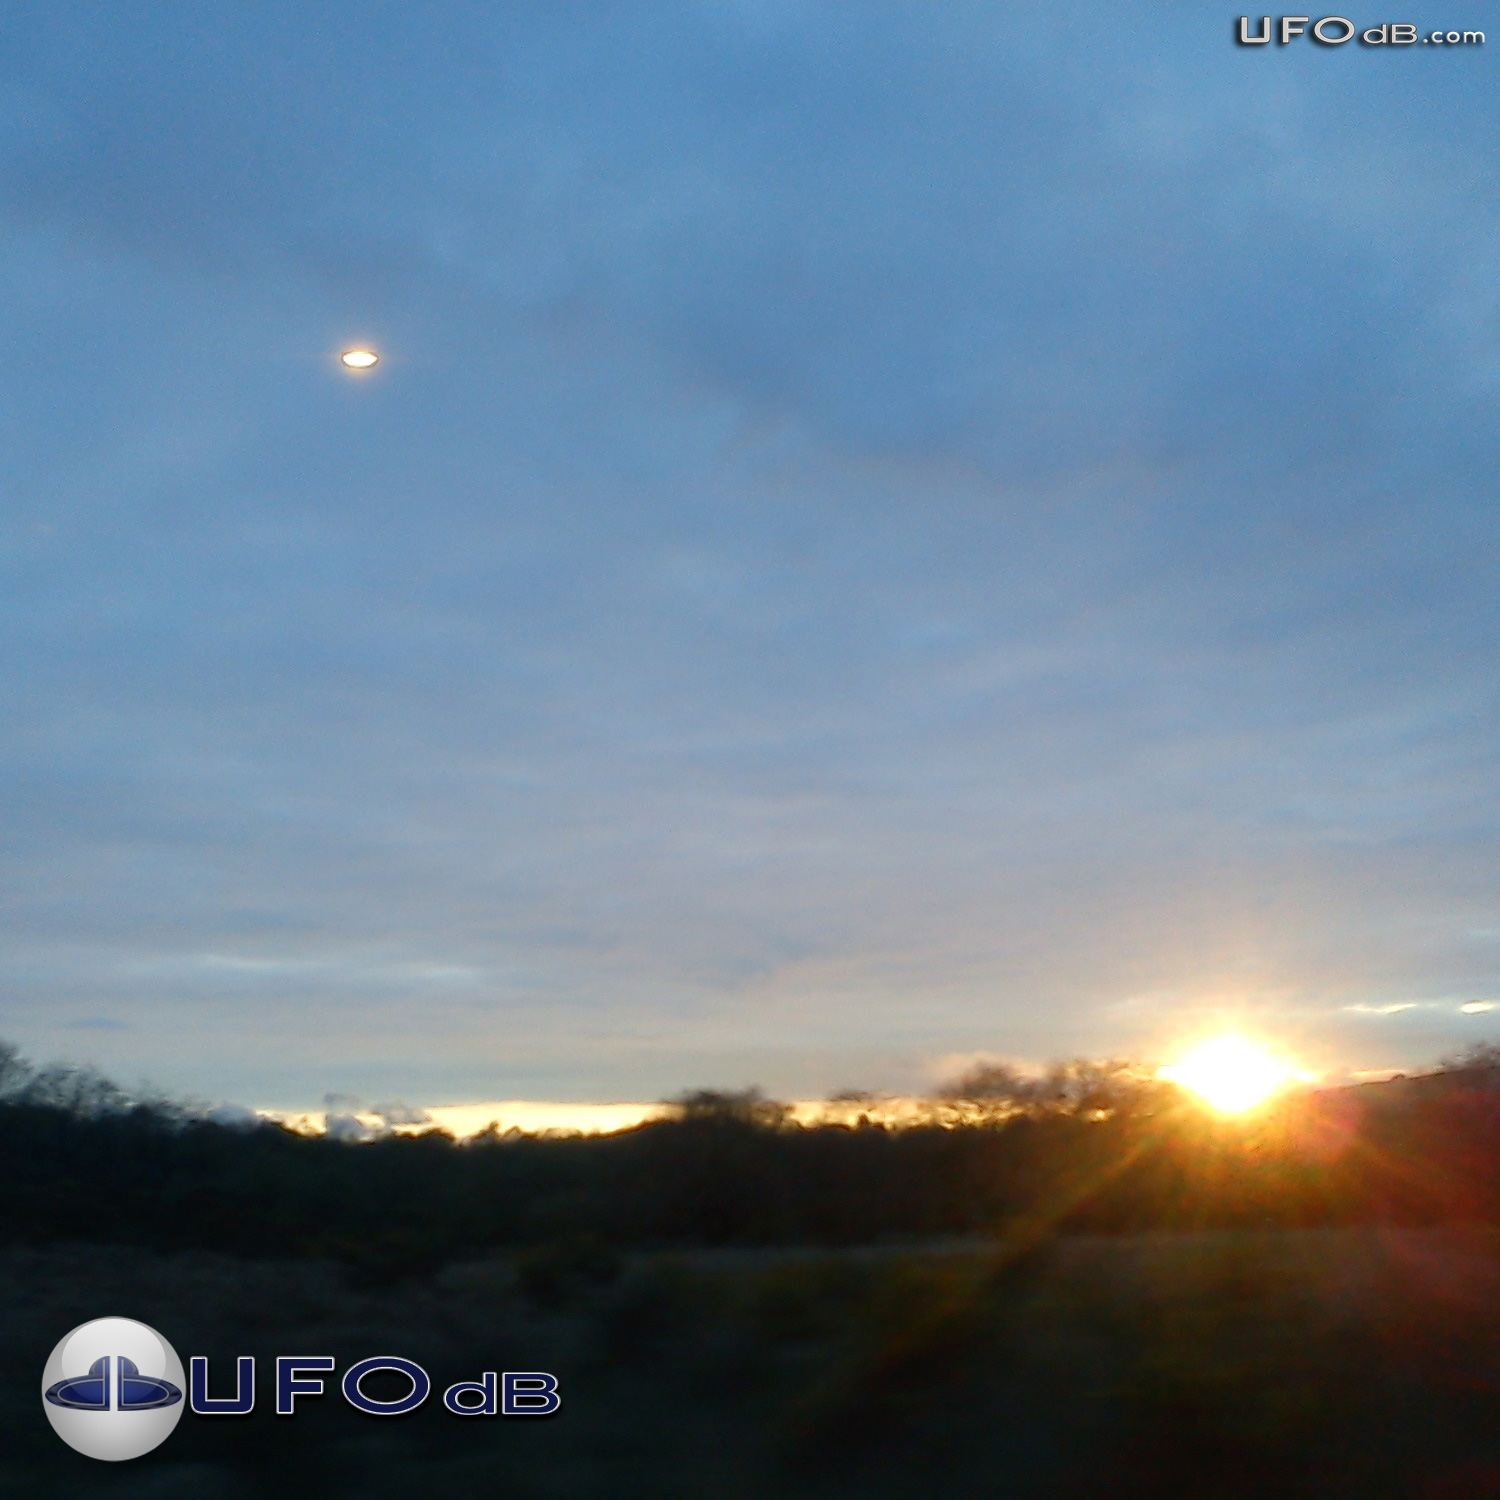 Darting UFO photographed from moving car | Bryncethin, Wales, UK 2011 UFO Picture #275-1